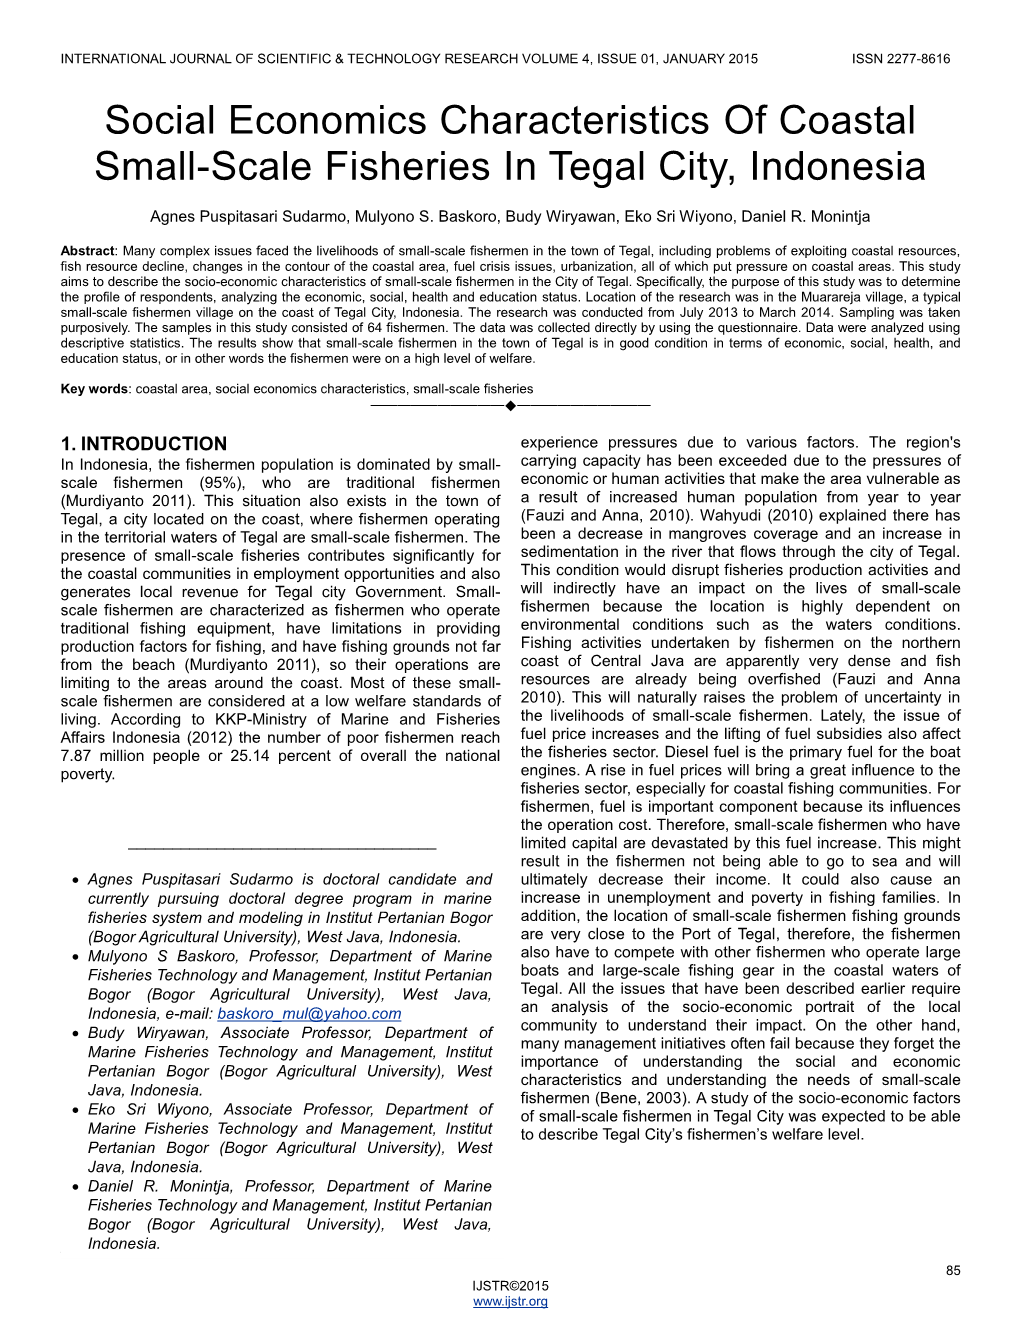 Social Economics Characteristics of Coastal Small-Scale Fisheries in Tegal City, Indonesia